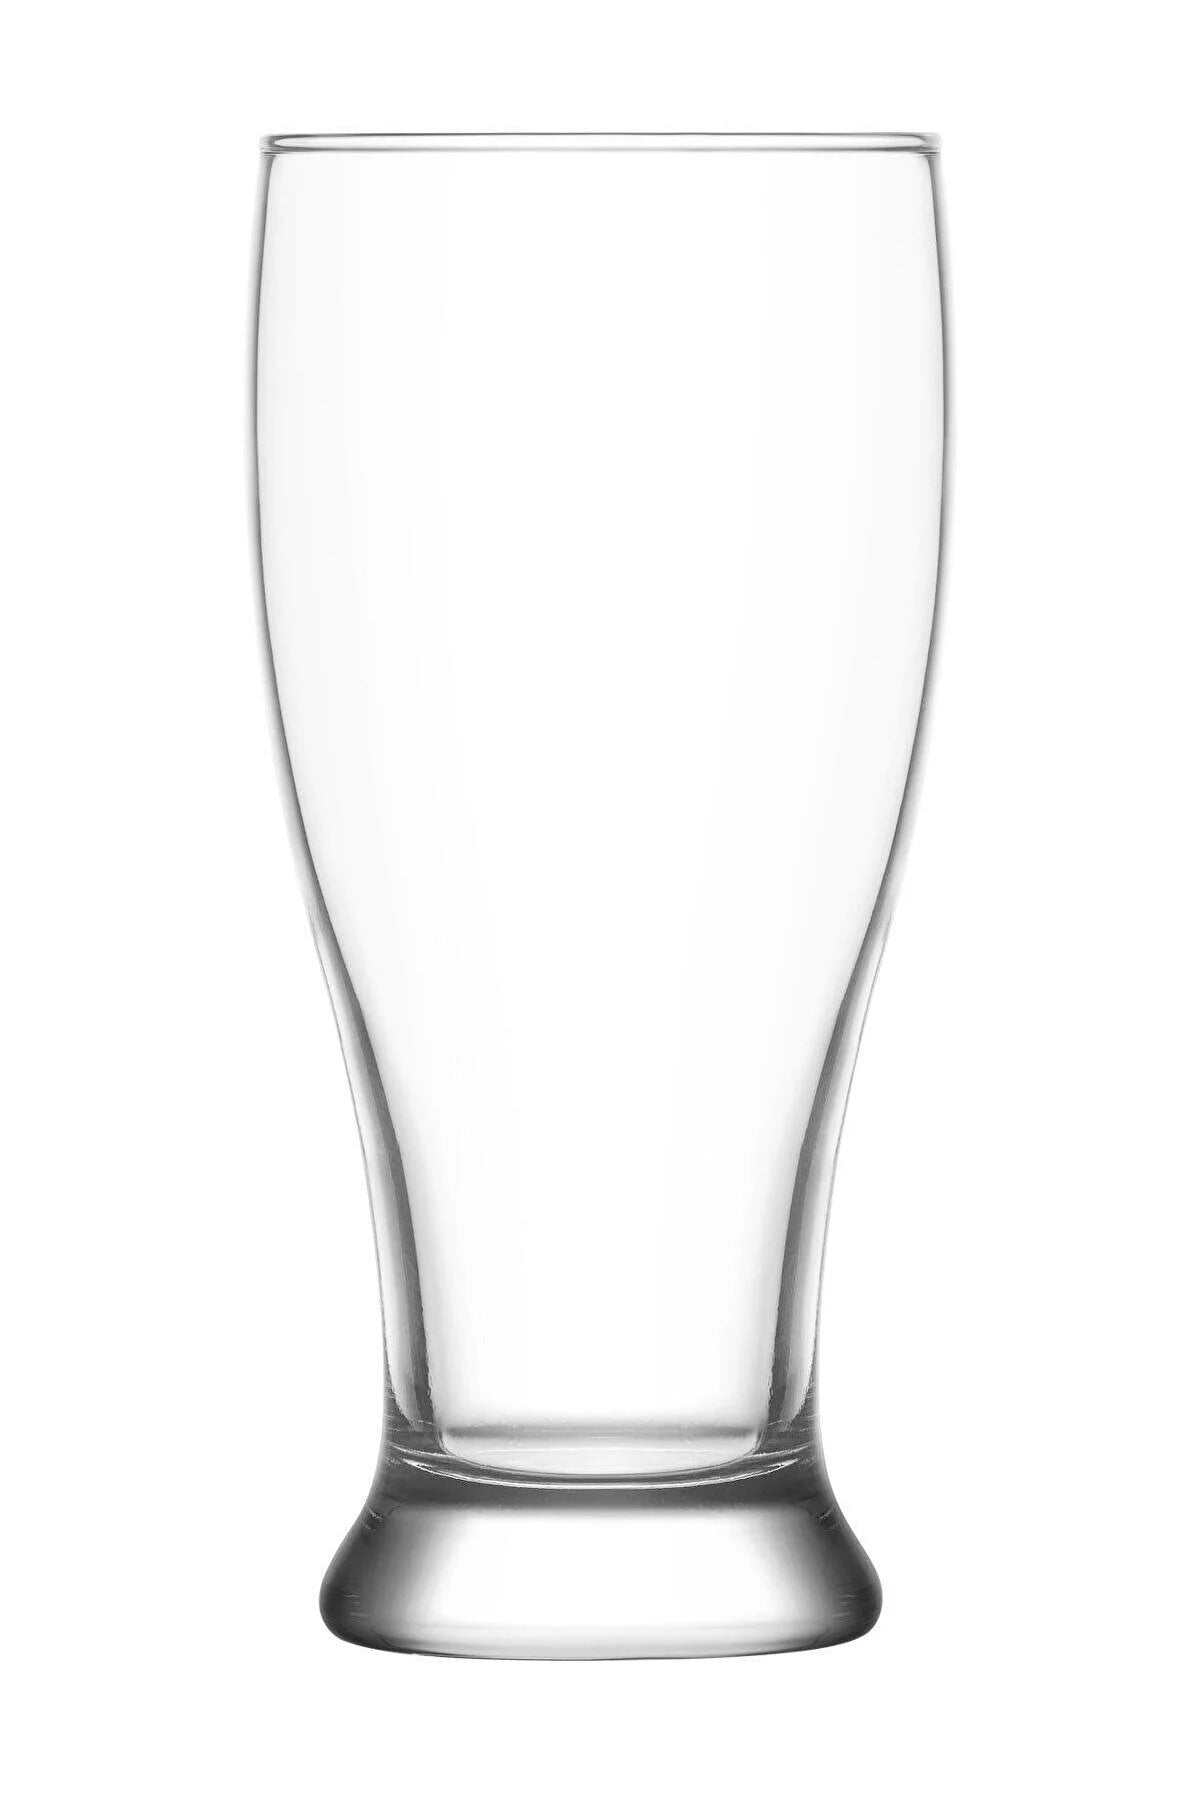 LAV Brotto Beer Glasses Sets of 6, 565cc